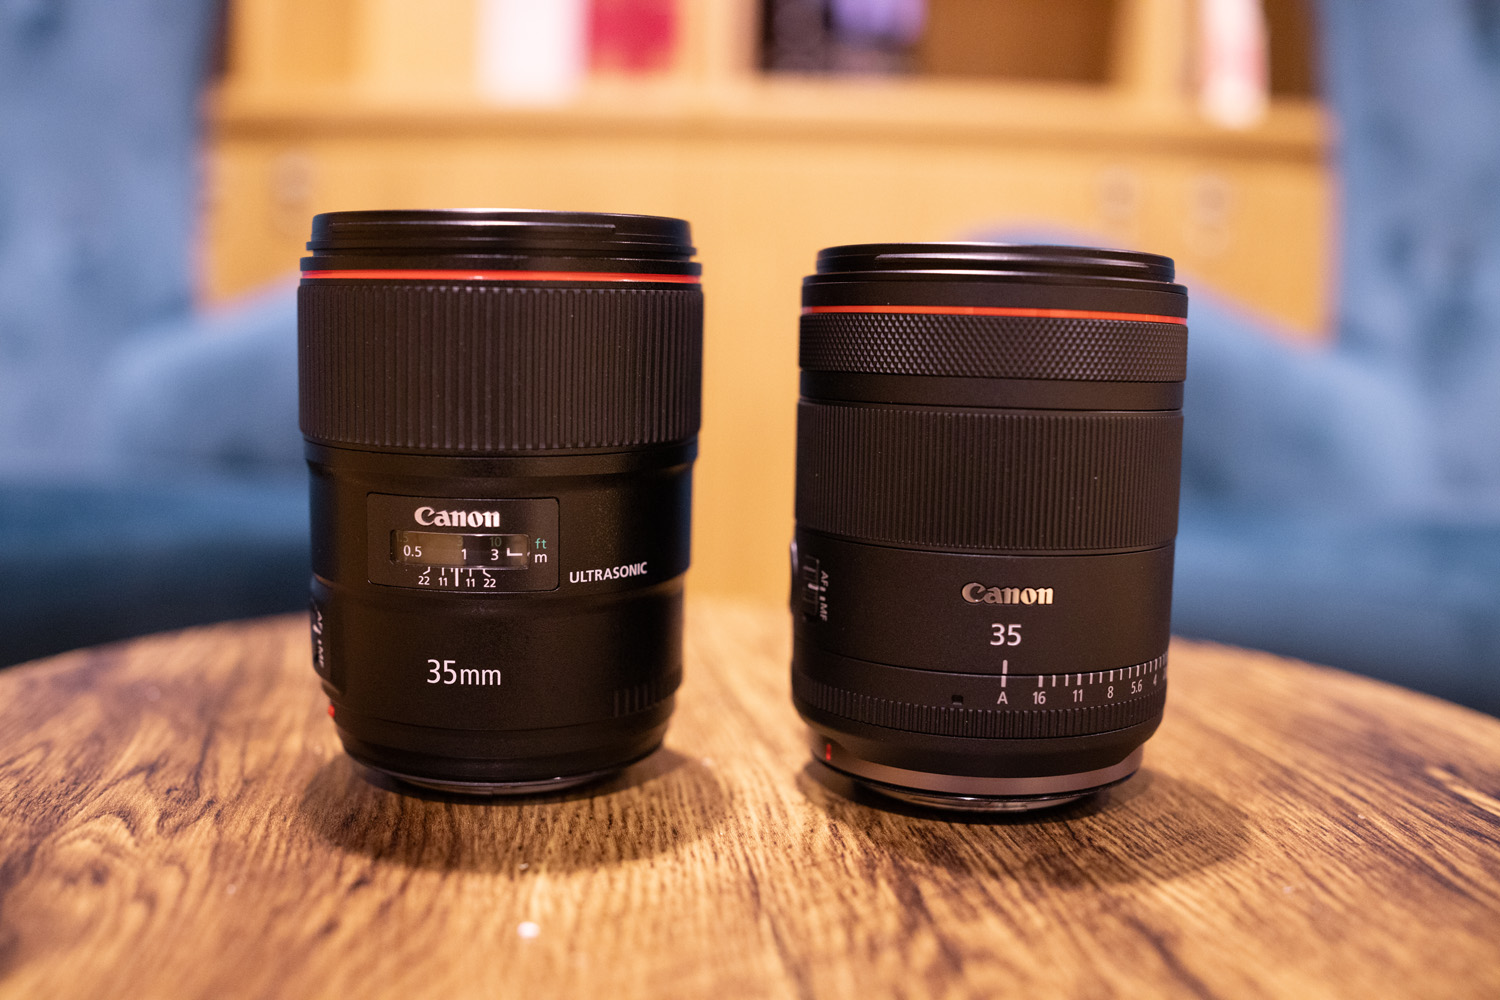 Canon EF 35mm f/1.4L II USM and Canon RF35mm f/1.4 L VCM side-by-side on table